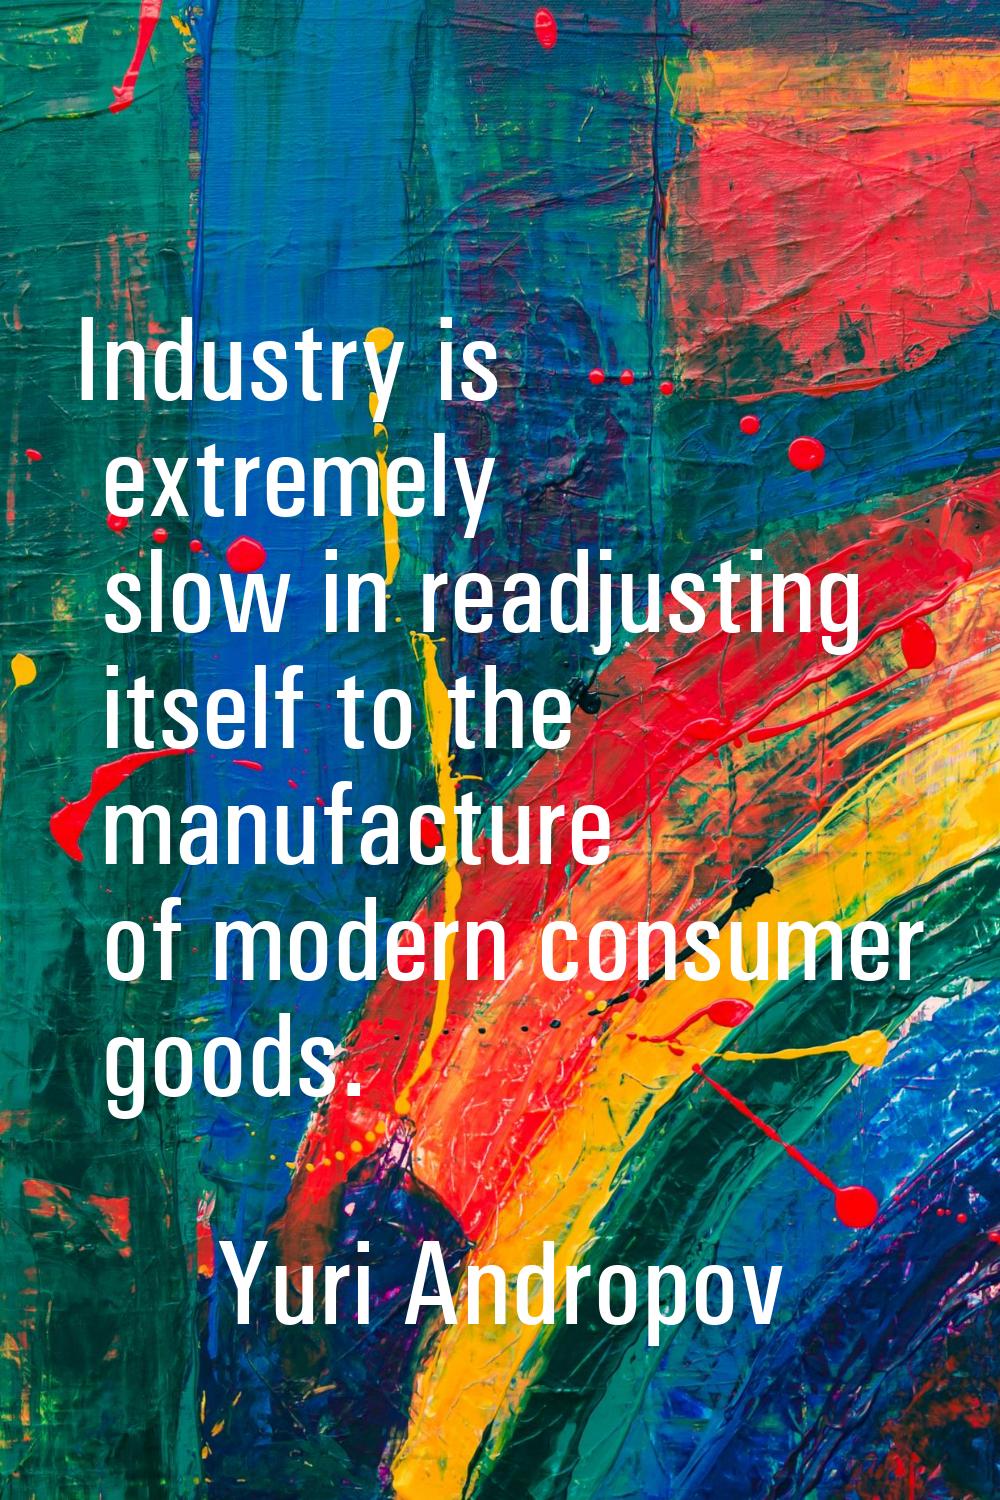 Industry is extremely slow in readjusting itself to the manufacture of modern consumer goods.